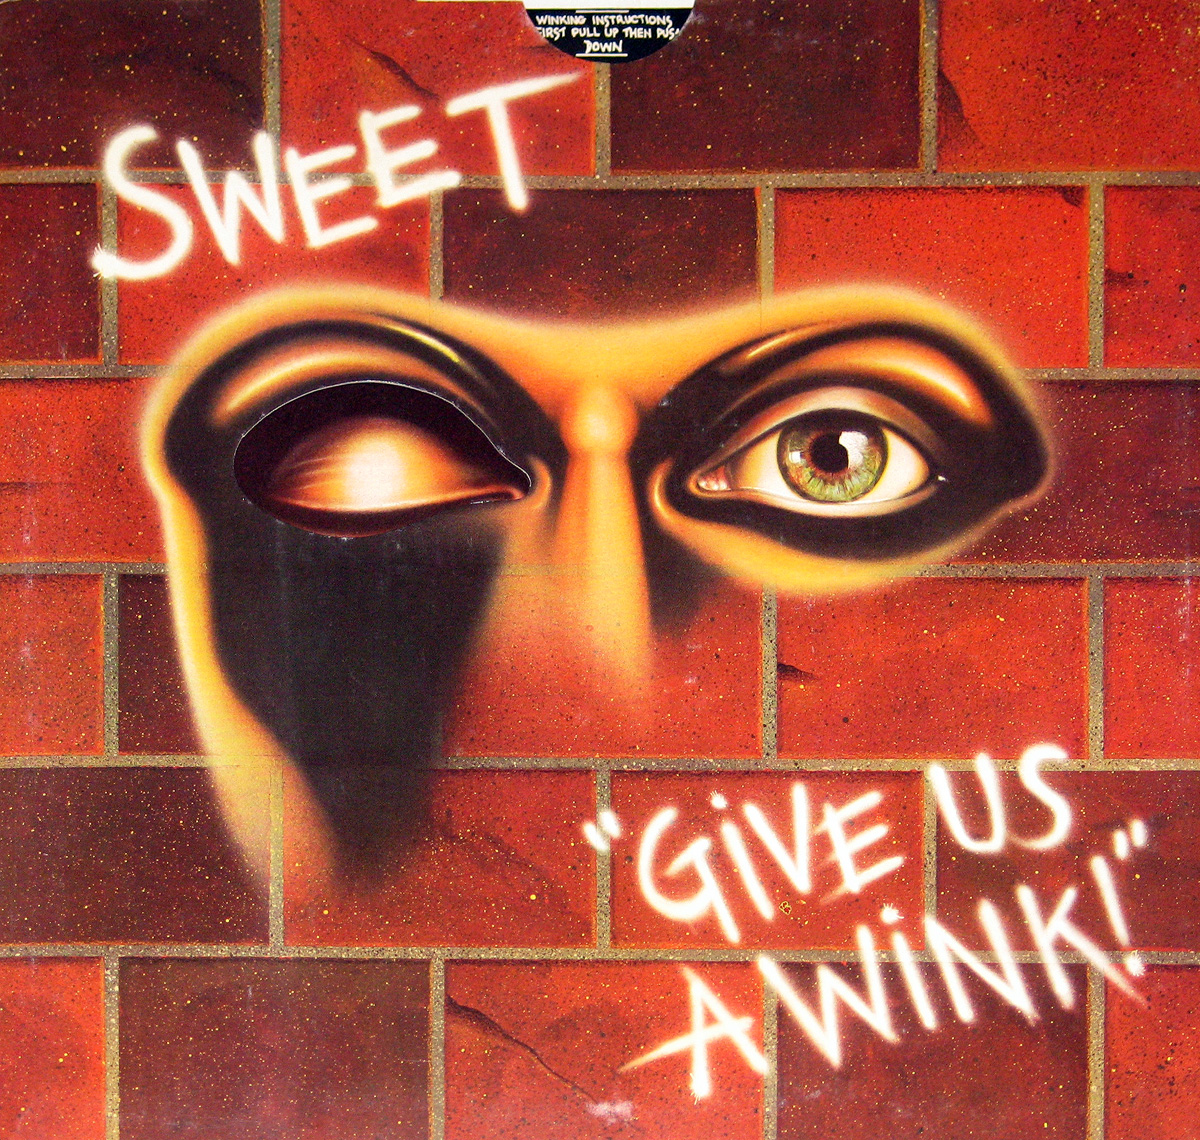 Sweet Give us a Wink / Wank Gimmick Cover England